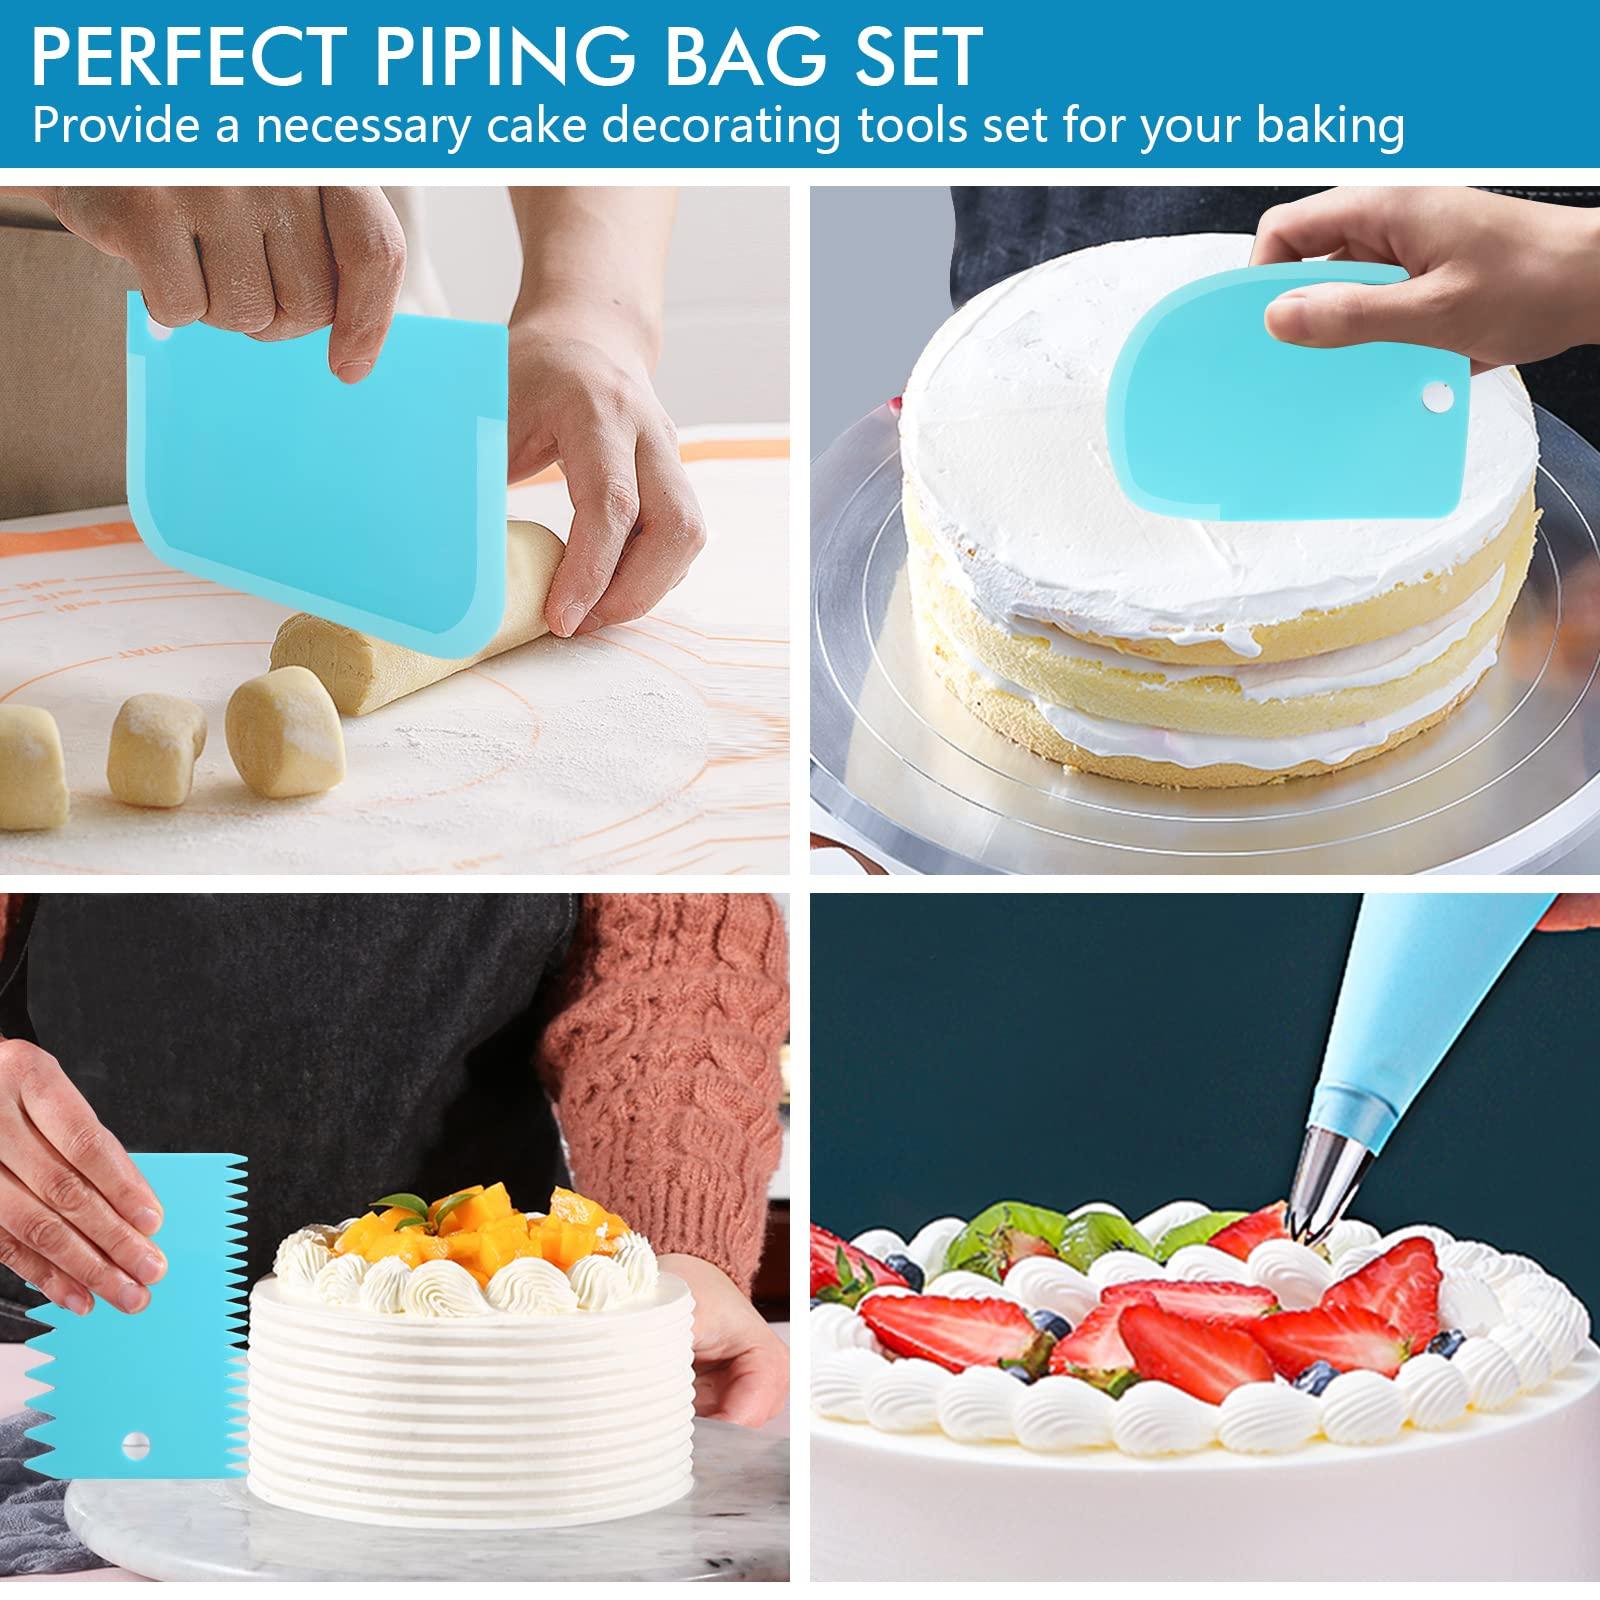 33PCS Icing Piping Bags and Tips Set, Reusable Pastry Bags and Cake Decorating Frosting Piping Kit for Baking, with Scrapers, Couplers, Silicone Rings, Cake Decorating Tools for Cake, Cupcake, Cookie - CookCave